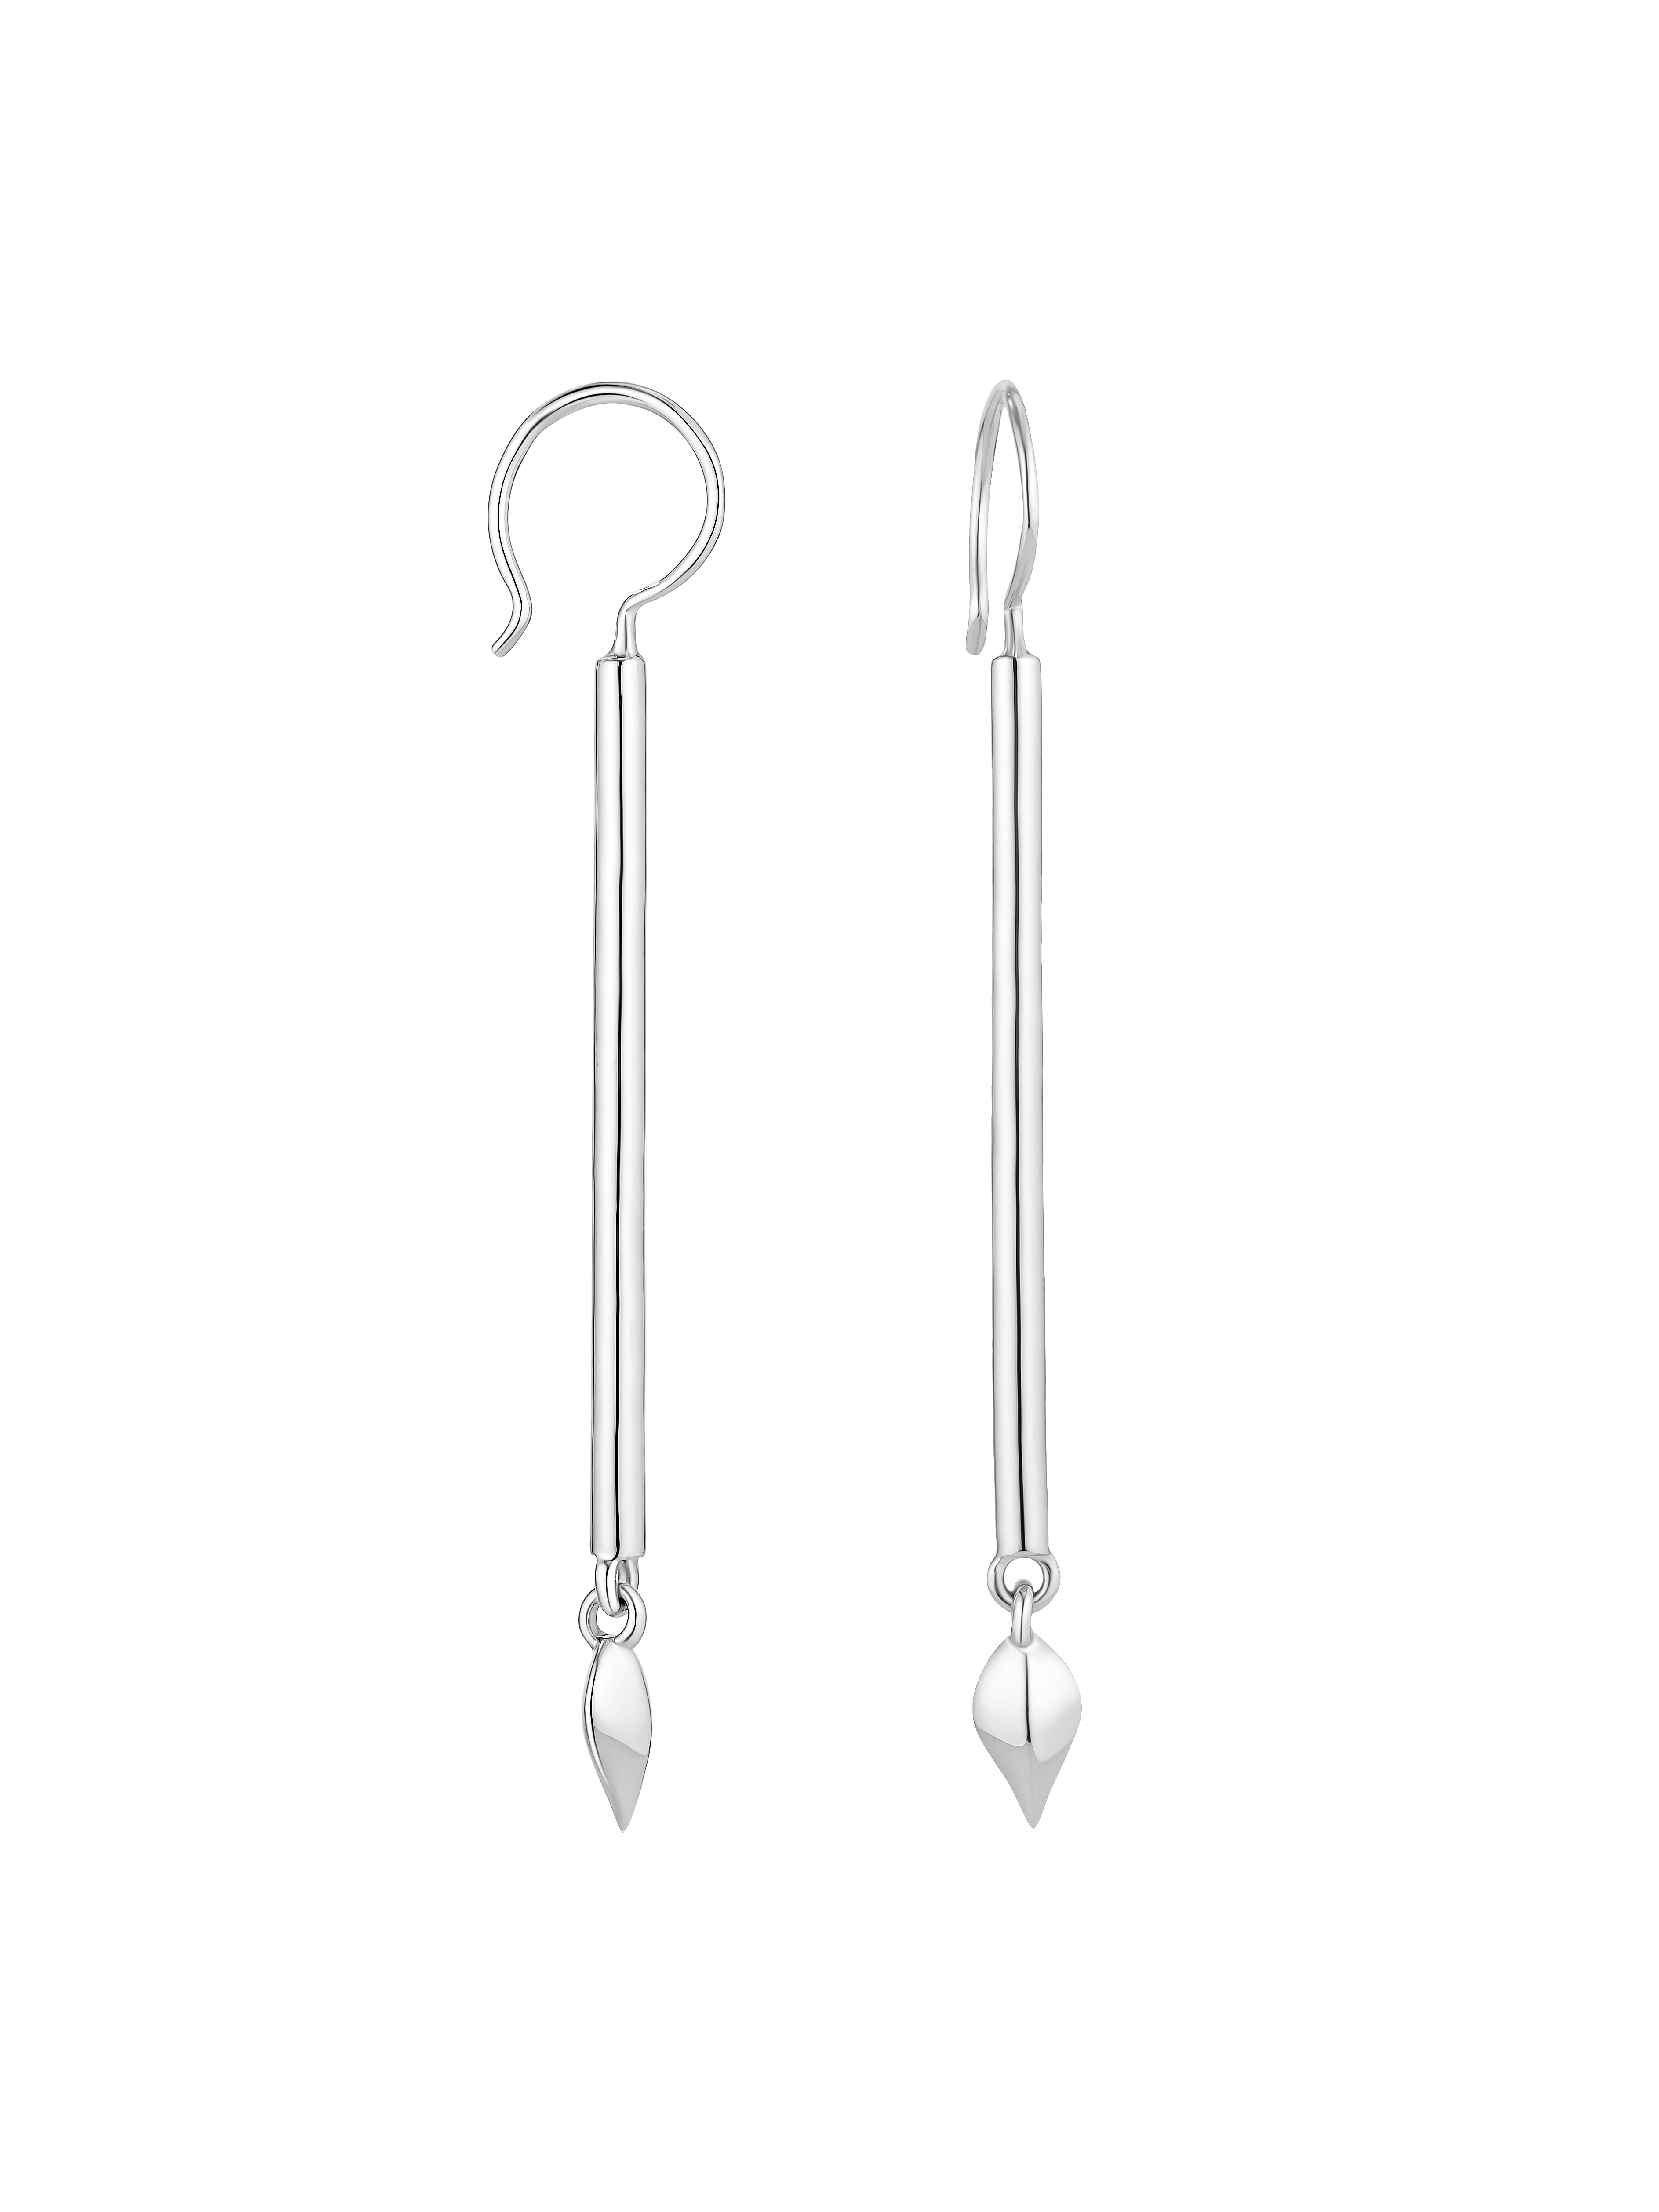 SILVER INVERTED CANDLE EARRINGS